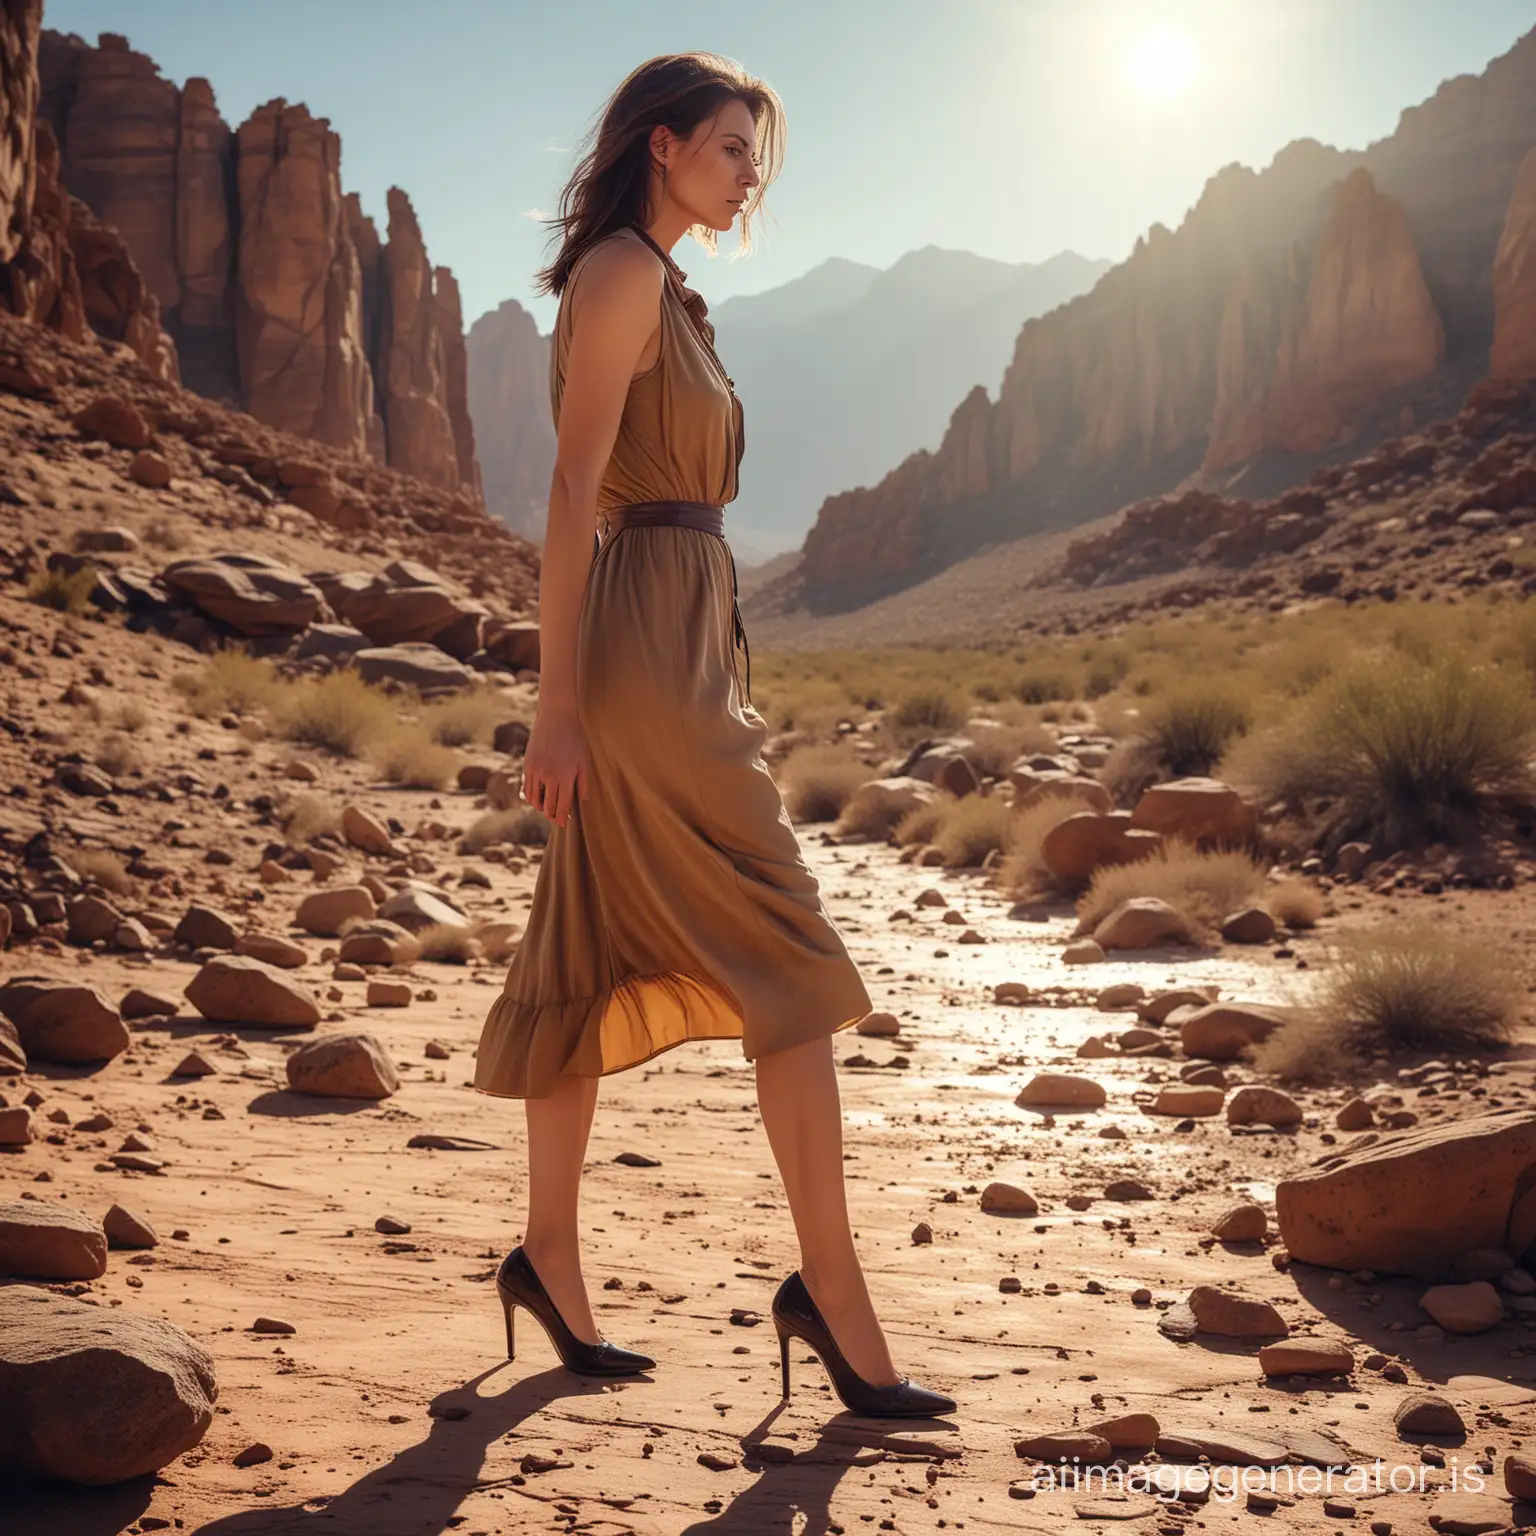 a woman dressed in vintage attire and pointy shoes with six-inch stiletto heels, very thirsty, sweating profusely, exhausted, walking in a rocky desert under a scorching sun in a wild, dramatic and scenic landscape with impressive views